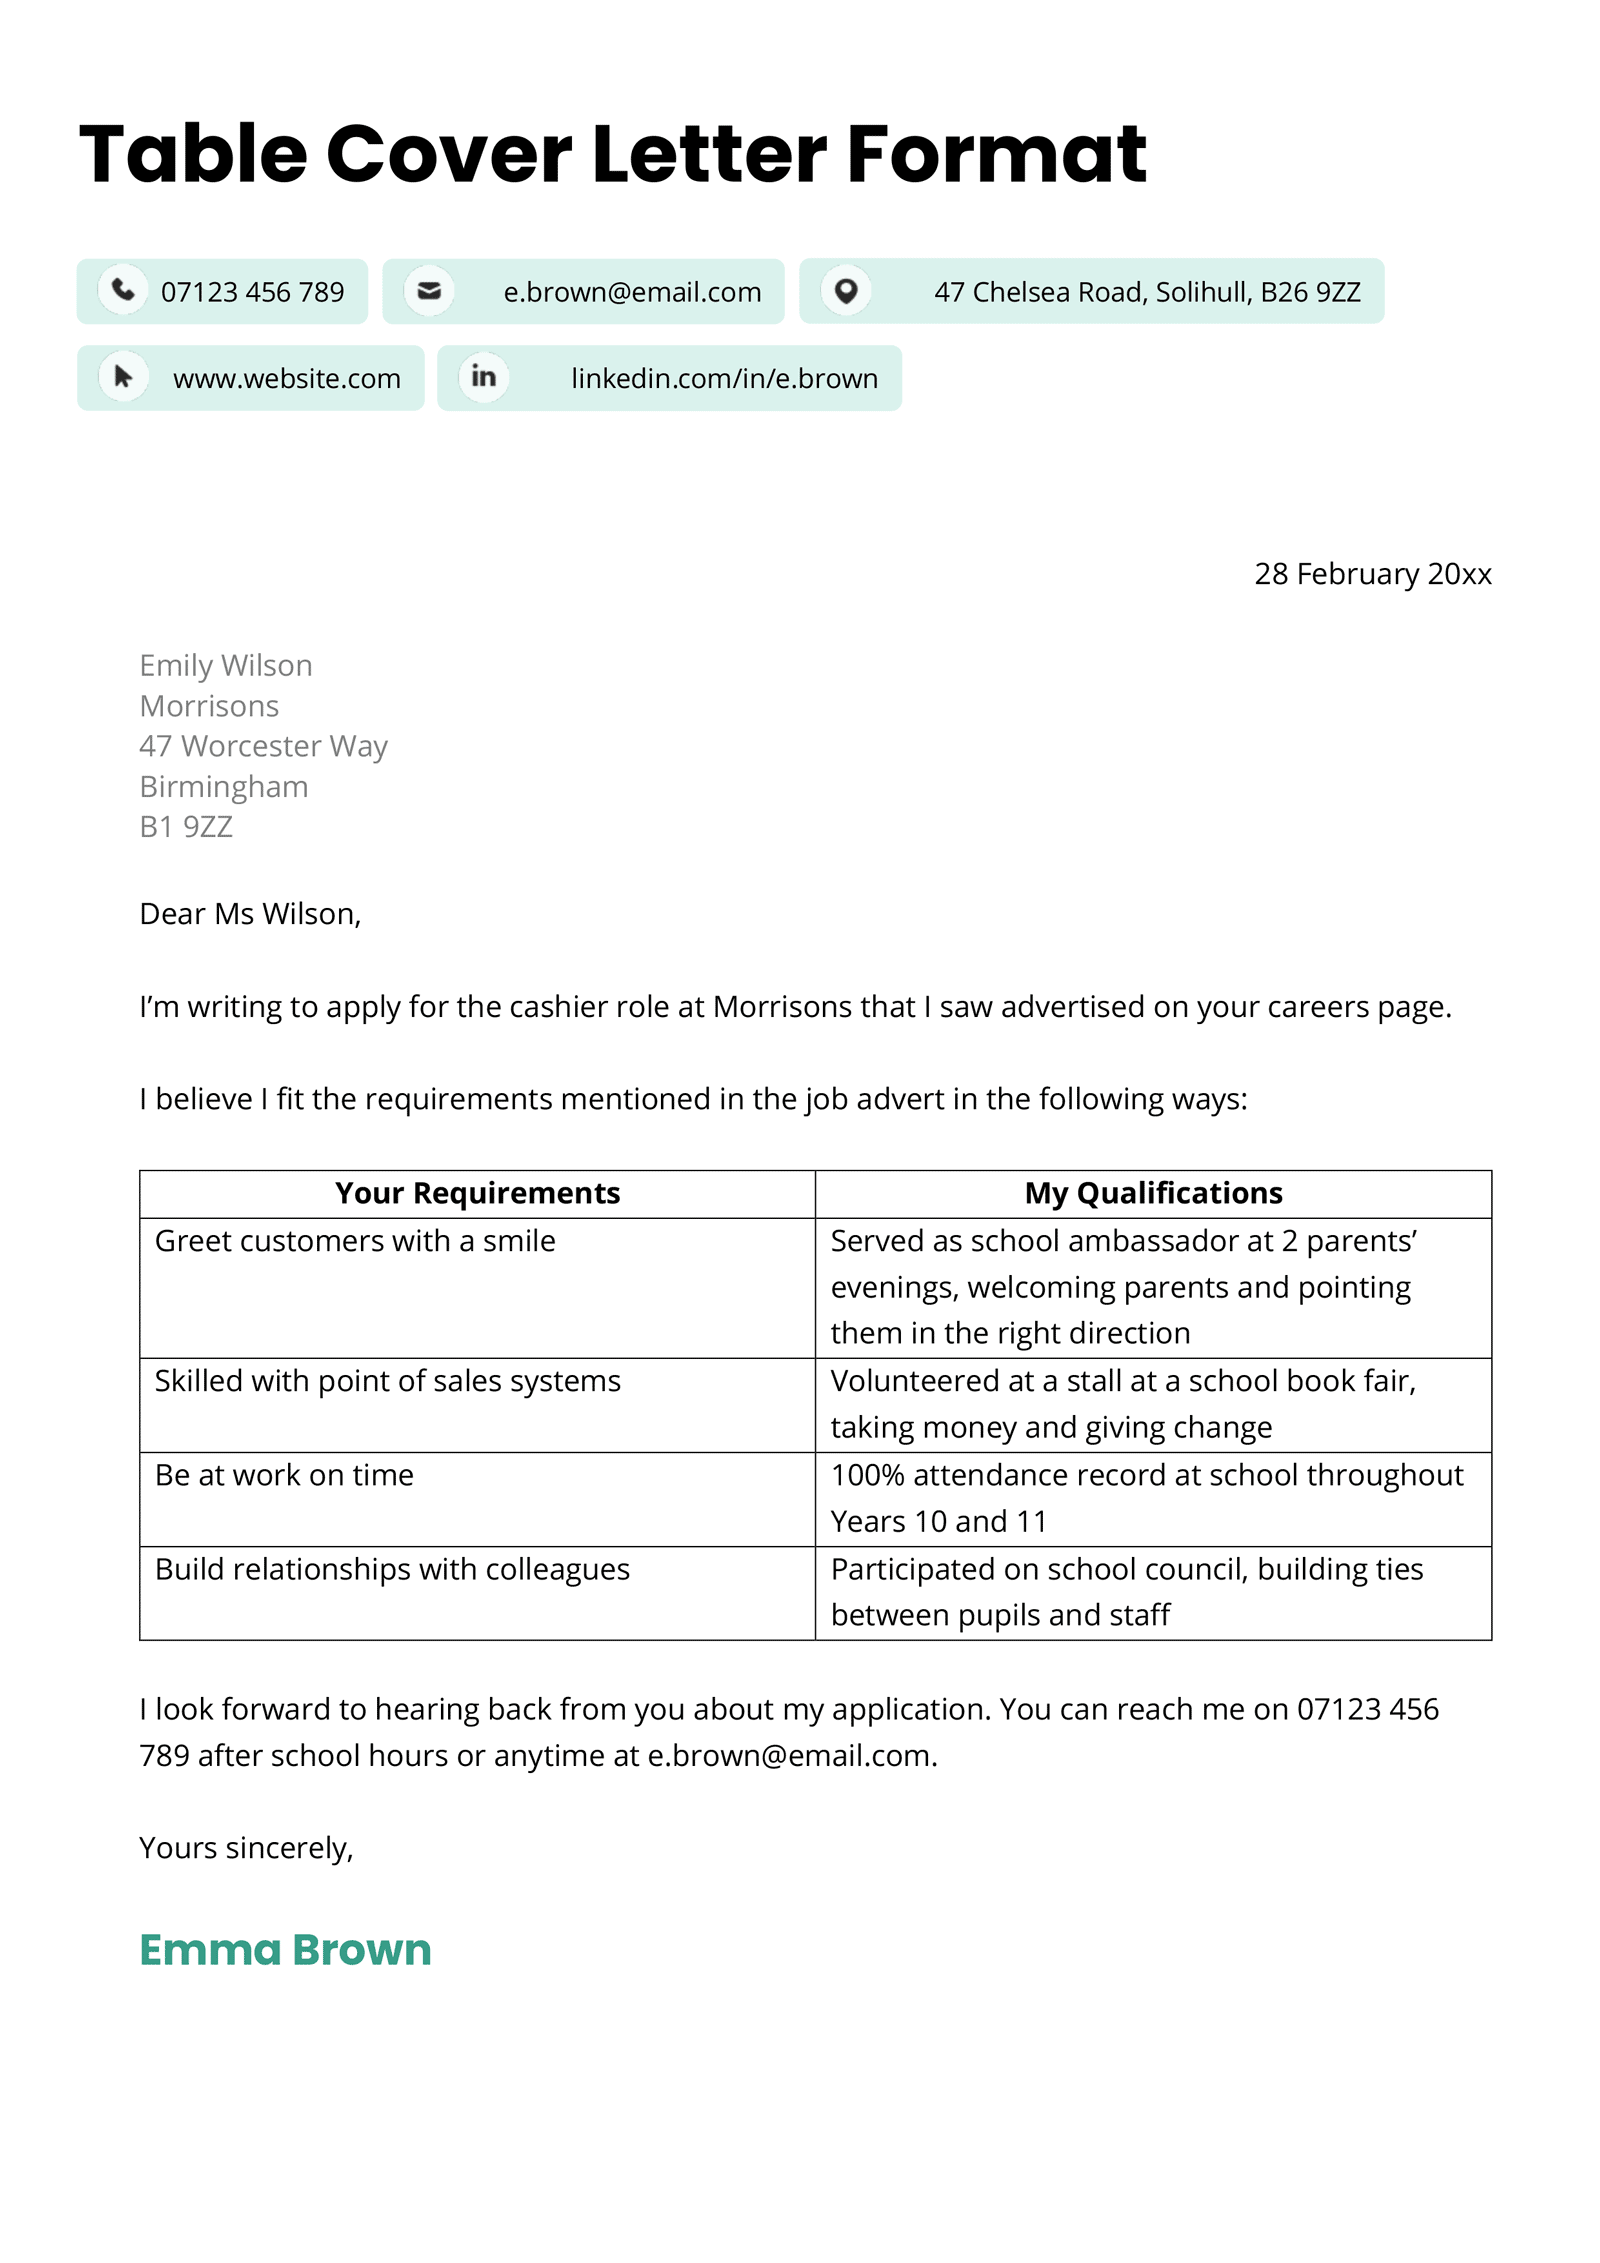 A cover letter for the UK that uses a table format to convey the applicant's skills, successes, and career highlights in an easy-to-read format